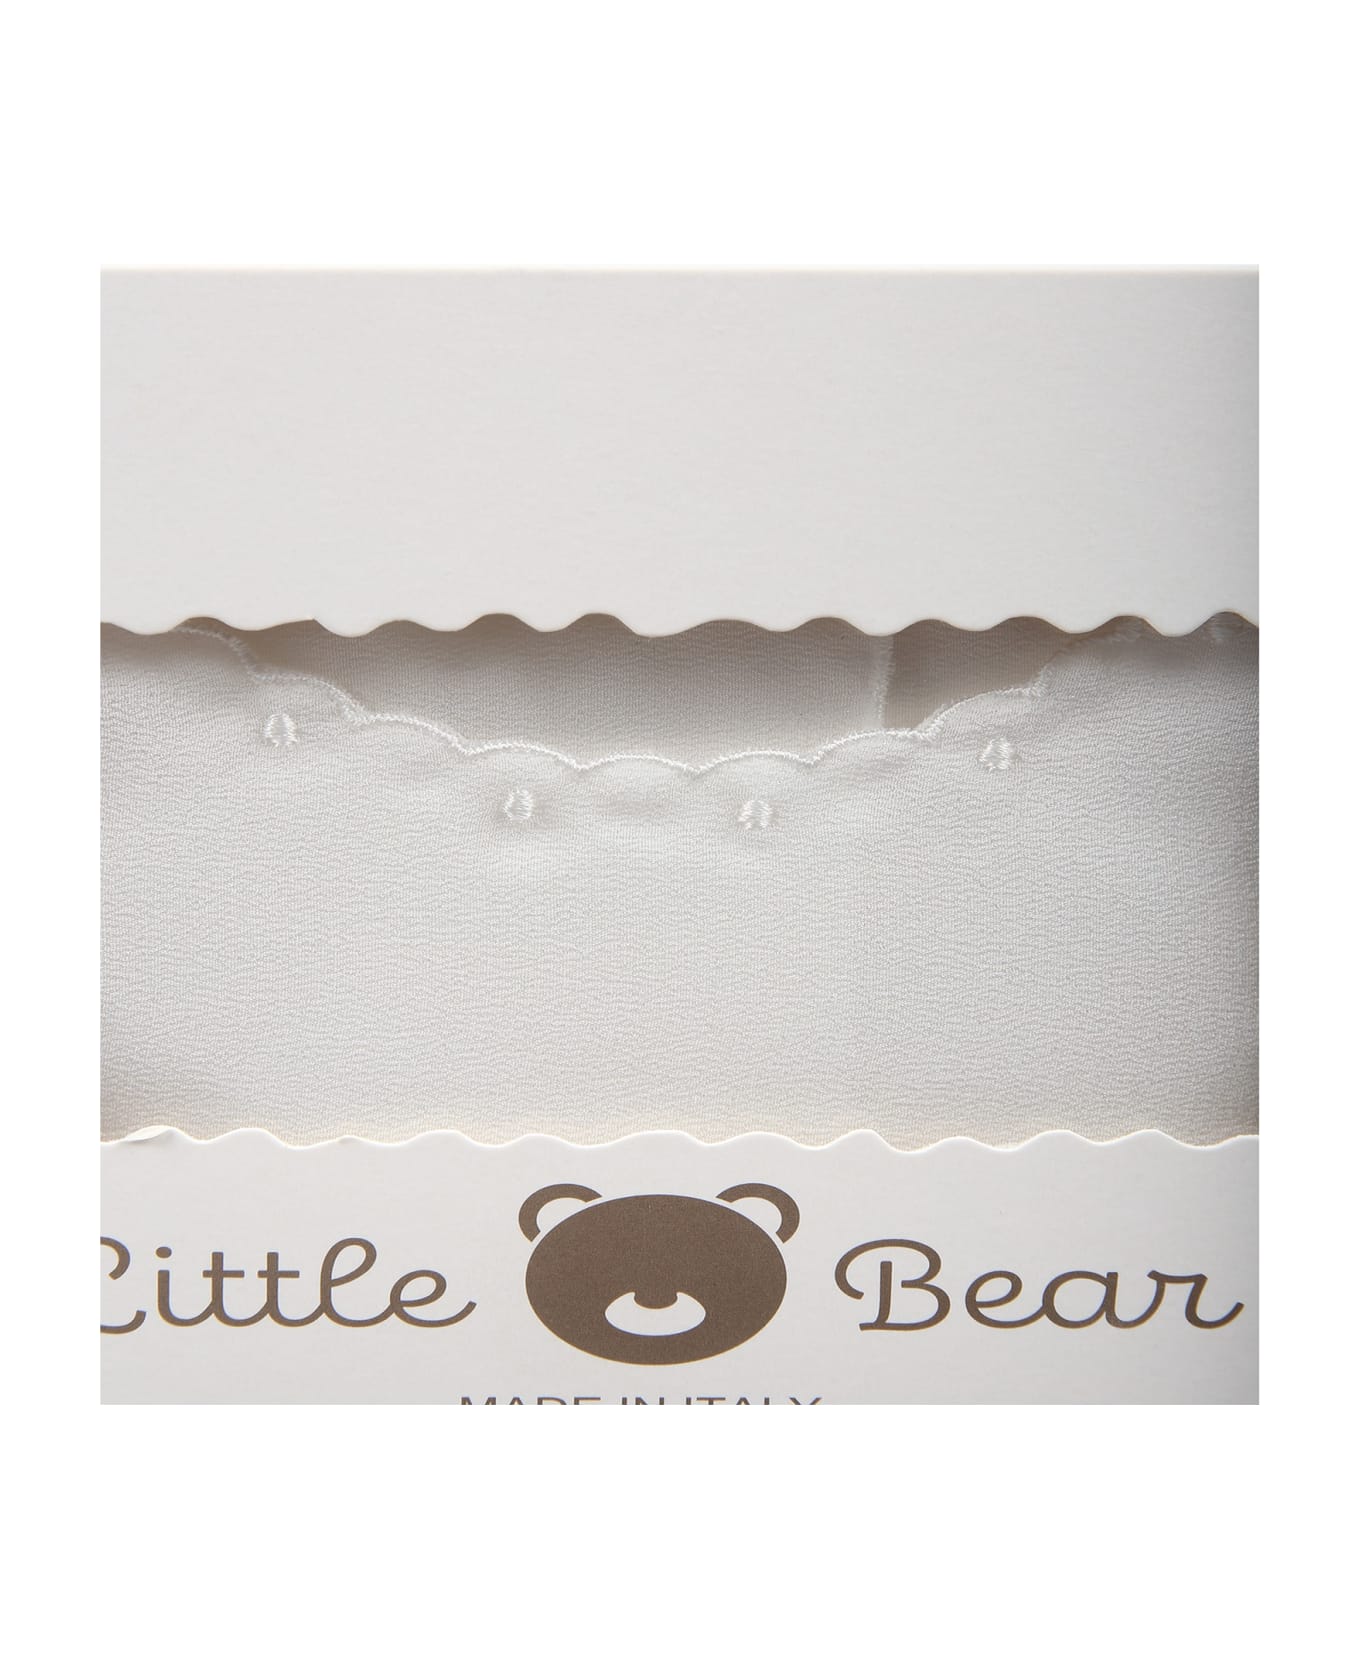 Little Bear Ivory Good-luck Newborn Shirt For Baby Girl With Polka-dots - White